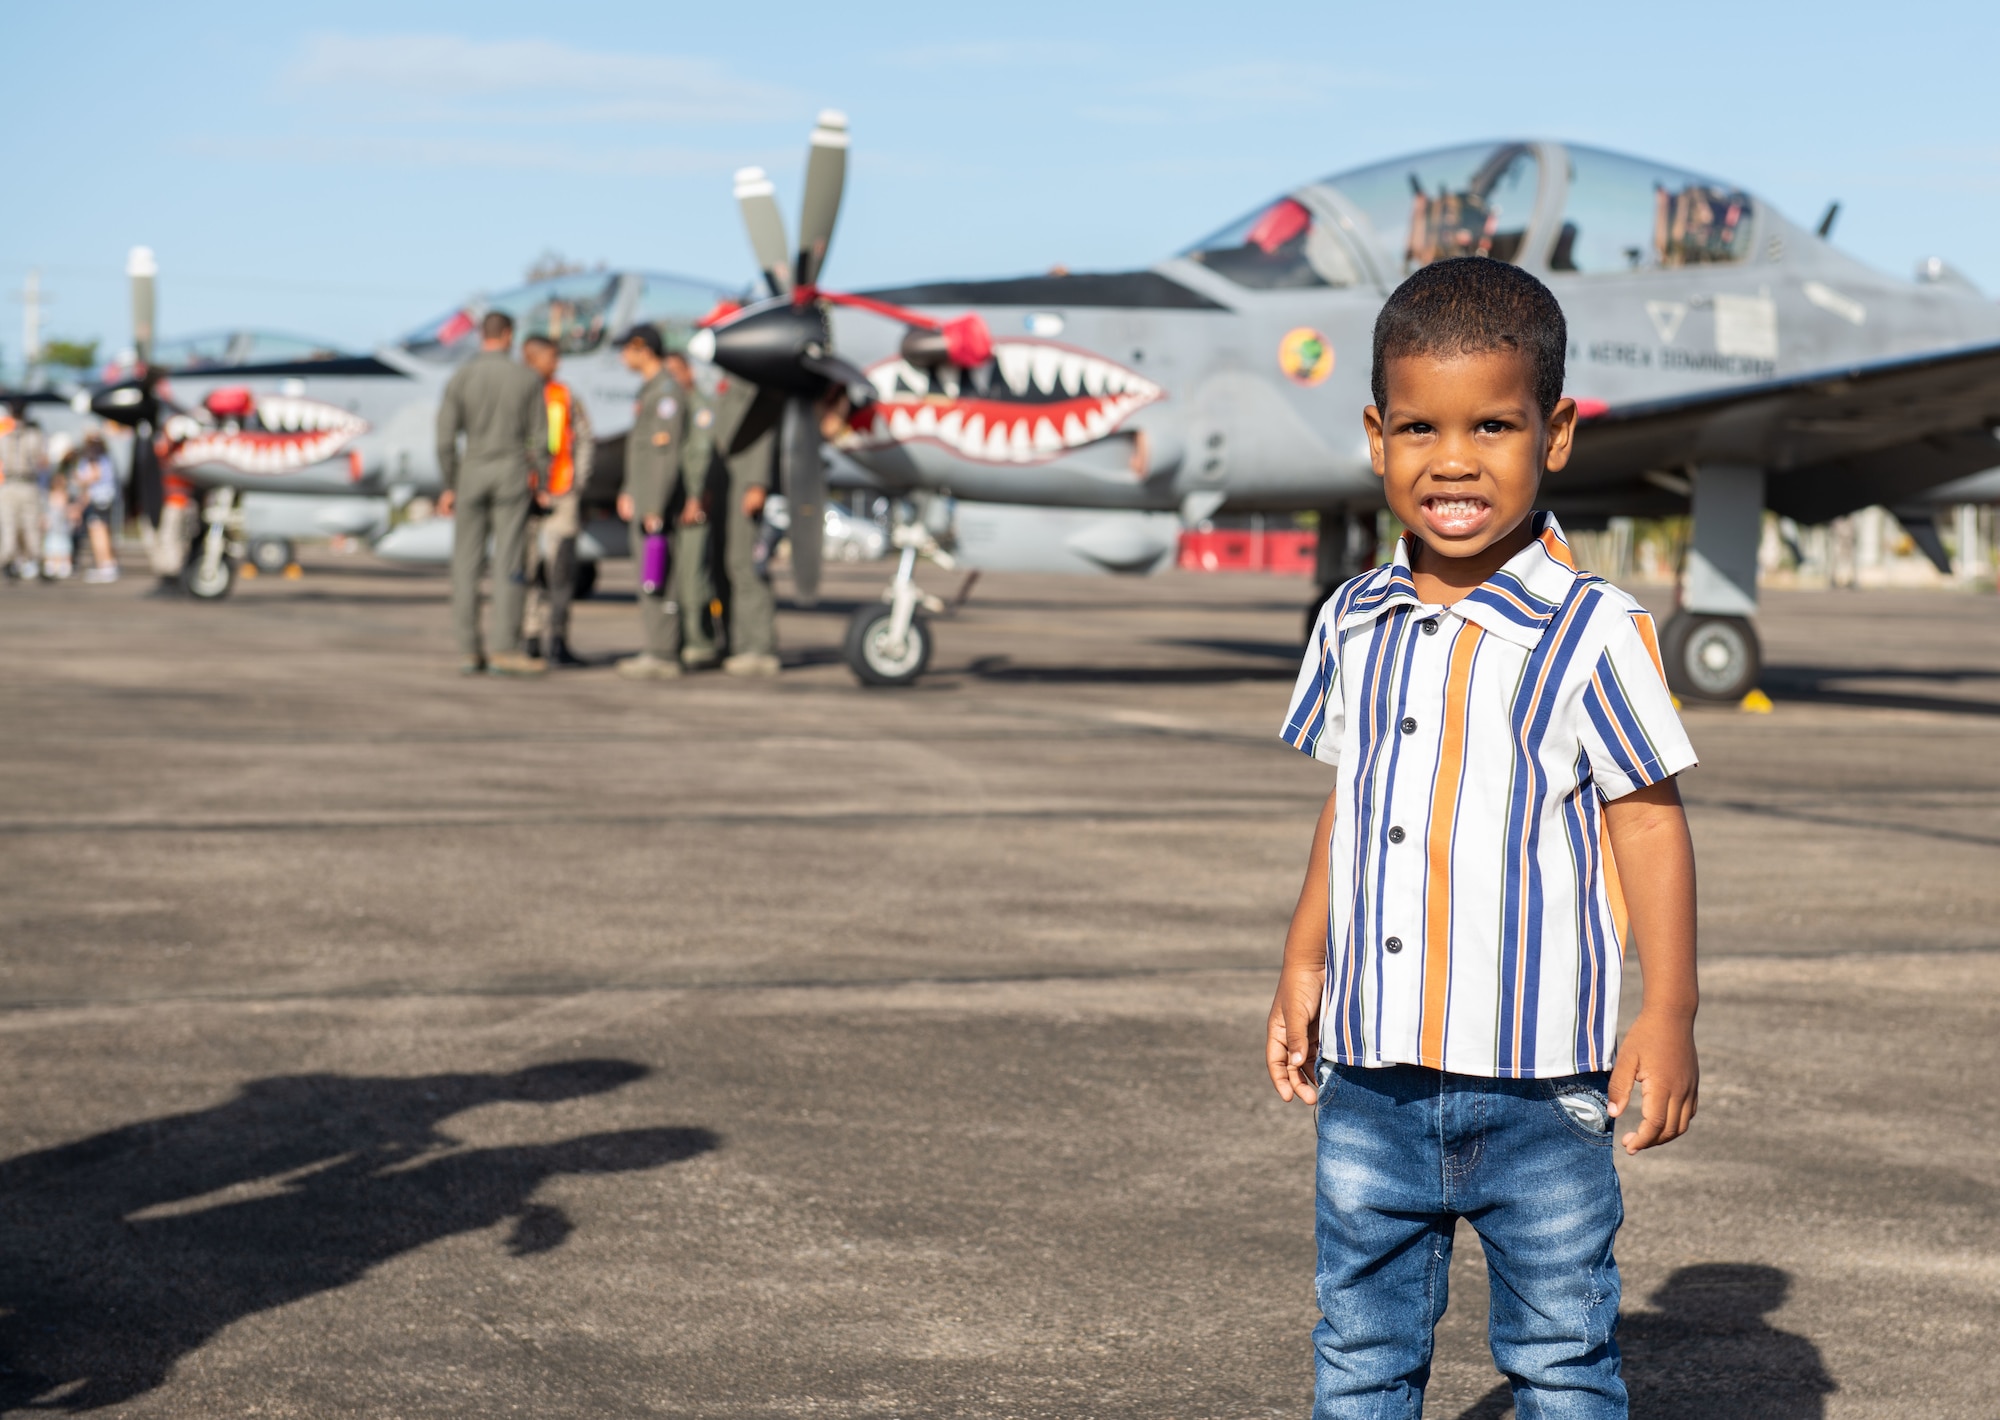 A boy poses for a photo during an airshow at San Isidro Air Base, Dominican Republic, Feb. 19, 2023.The airshow was dedicated to the Dominican Republic’s 75th anniversary where both U.S. and Dominican Republic aircraft demonstrated capabilities and strengthened their bond as partner nations.(U.S. Air Force photo by Tech. Sgt. Jessica H. Smith-McMahan)